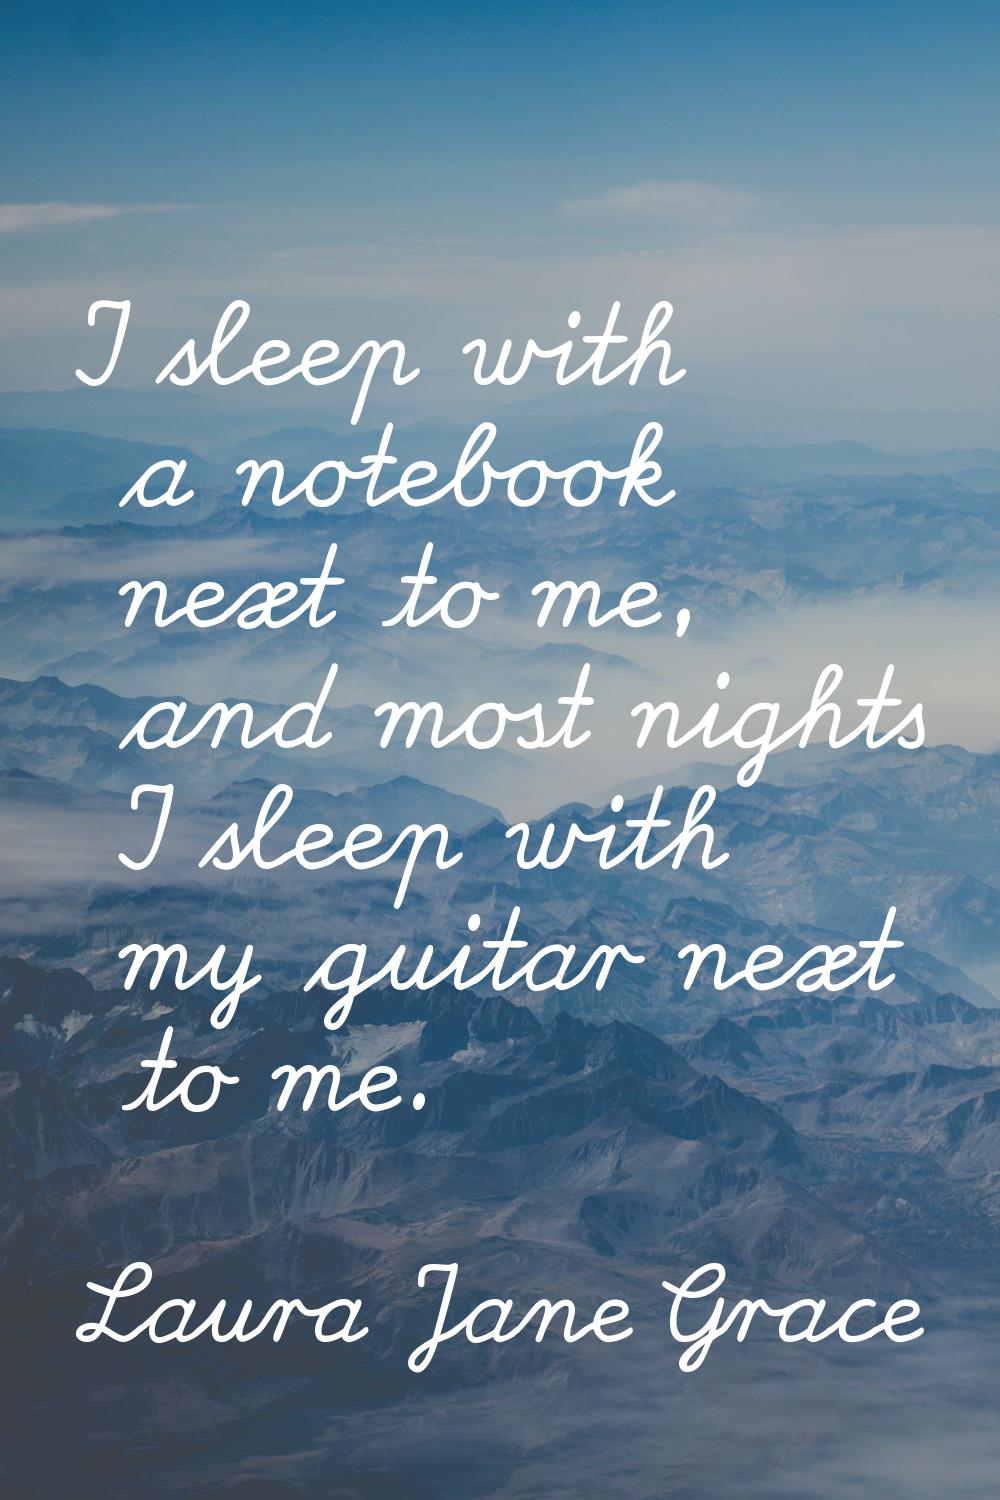 I sleep with a notebook next to me, and most nights I sleep with my guitar next to me.